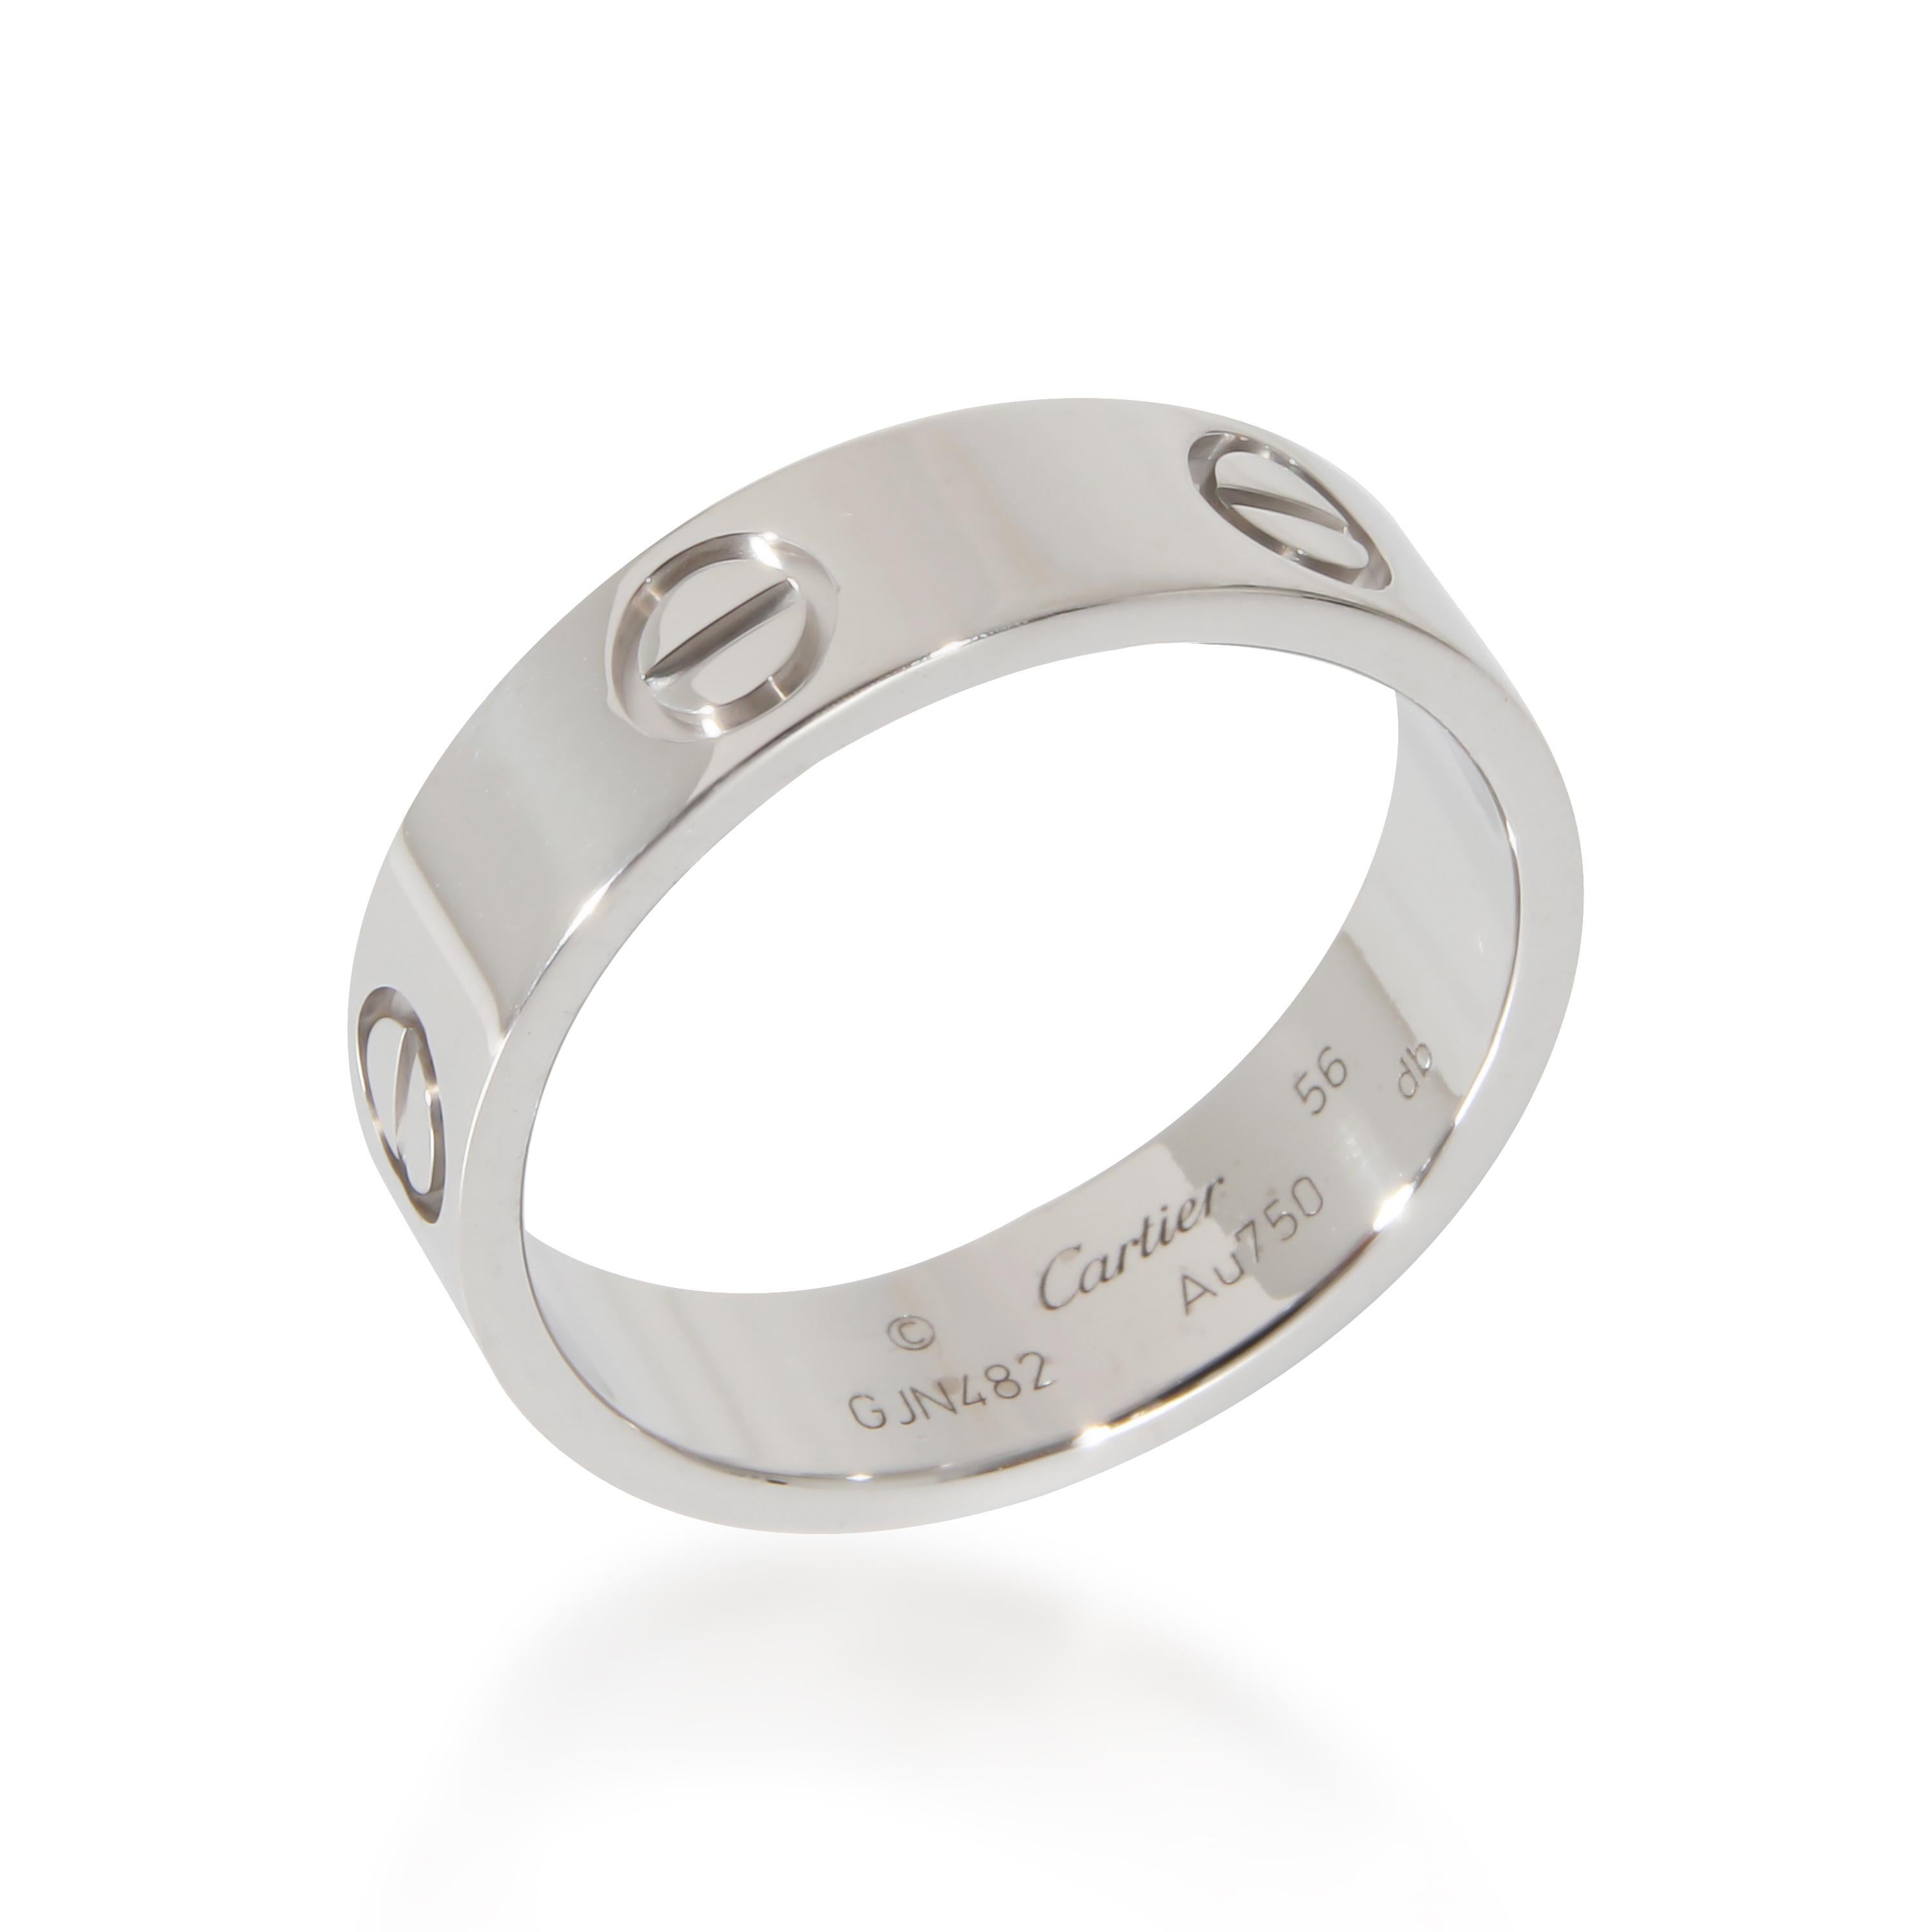 Cartier Love Ring in 18k White Gold

PRIMARY DETAILS
SKU: 133474
Listing Title: Cartier Love Ring in 18k White Gold
Condition Description: Cartier's Love collection is the epitome of iconic, from the recognizable designs to the history behind the